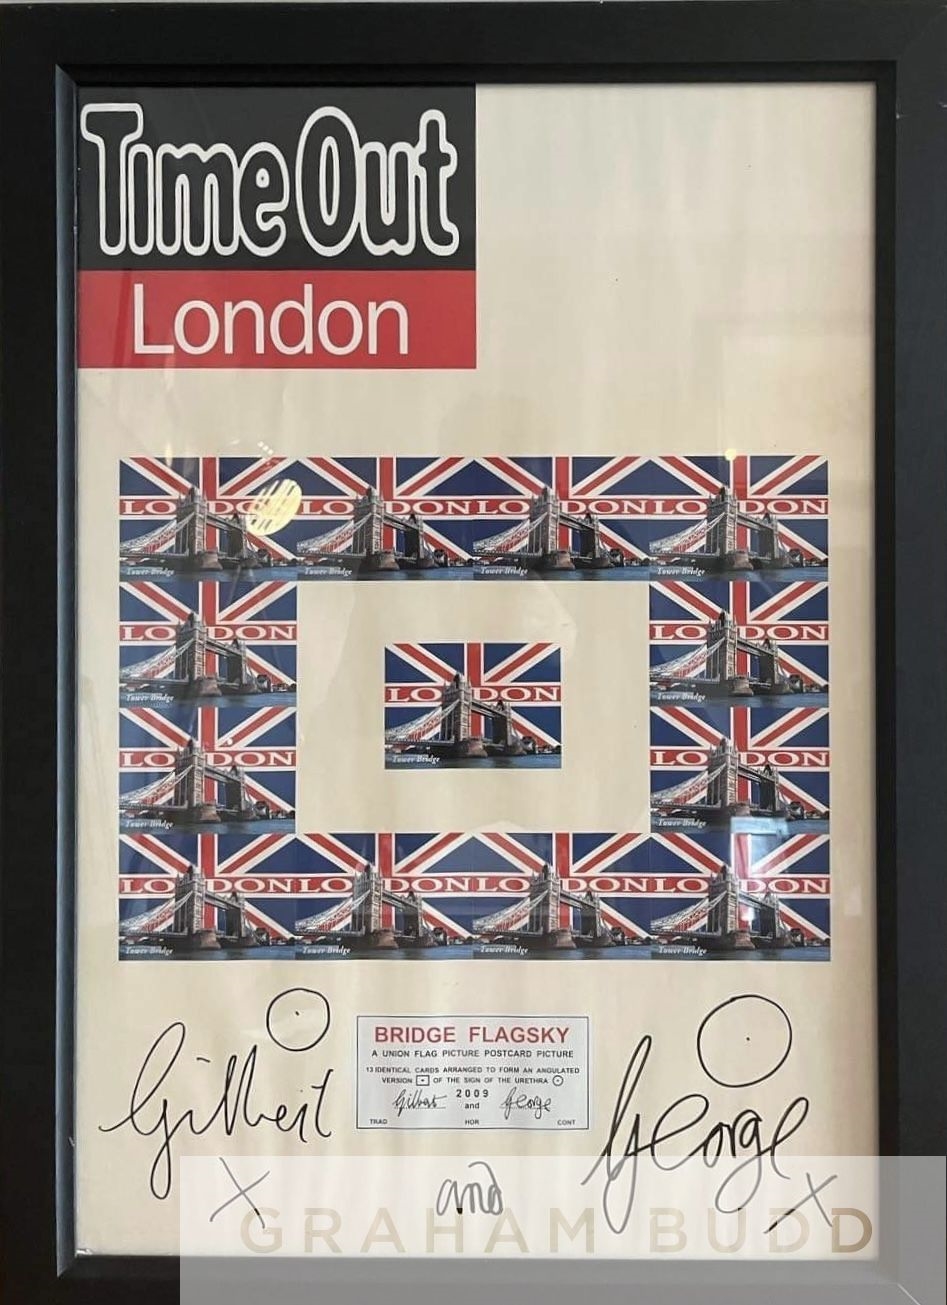 Time Out, London by Gilbert & George, 2009